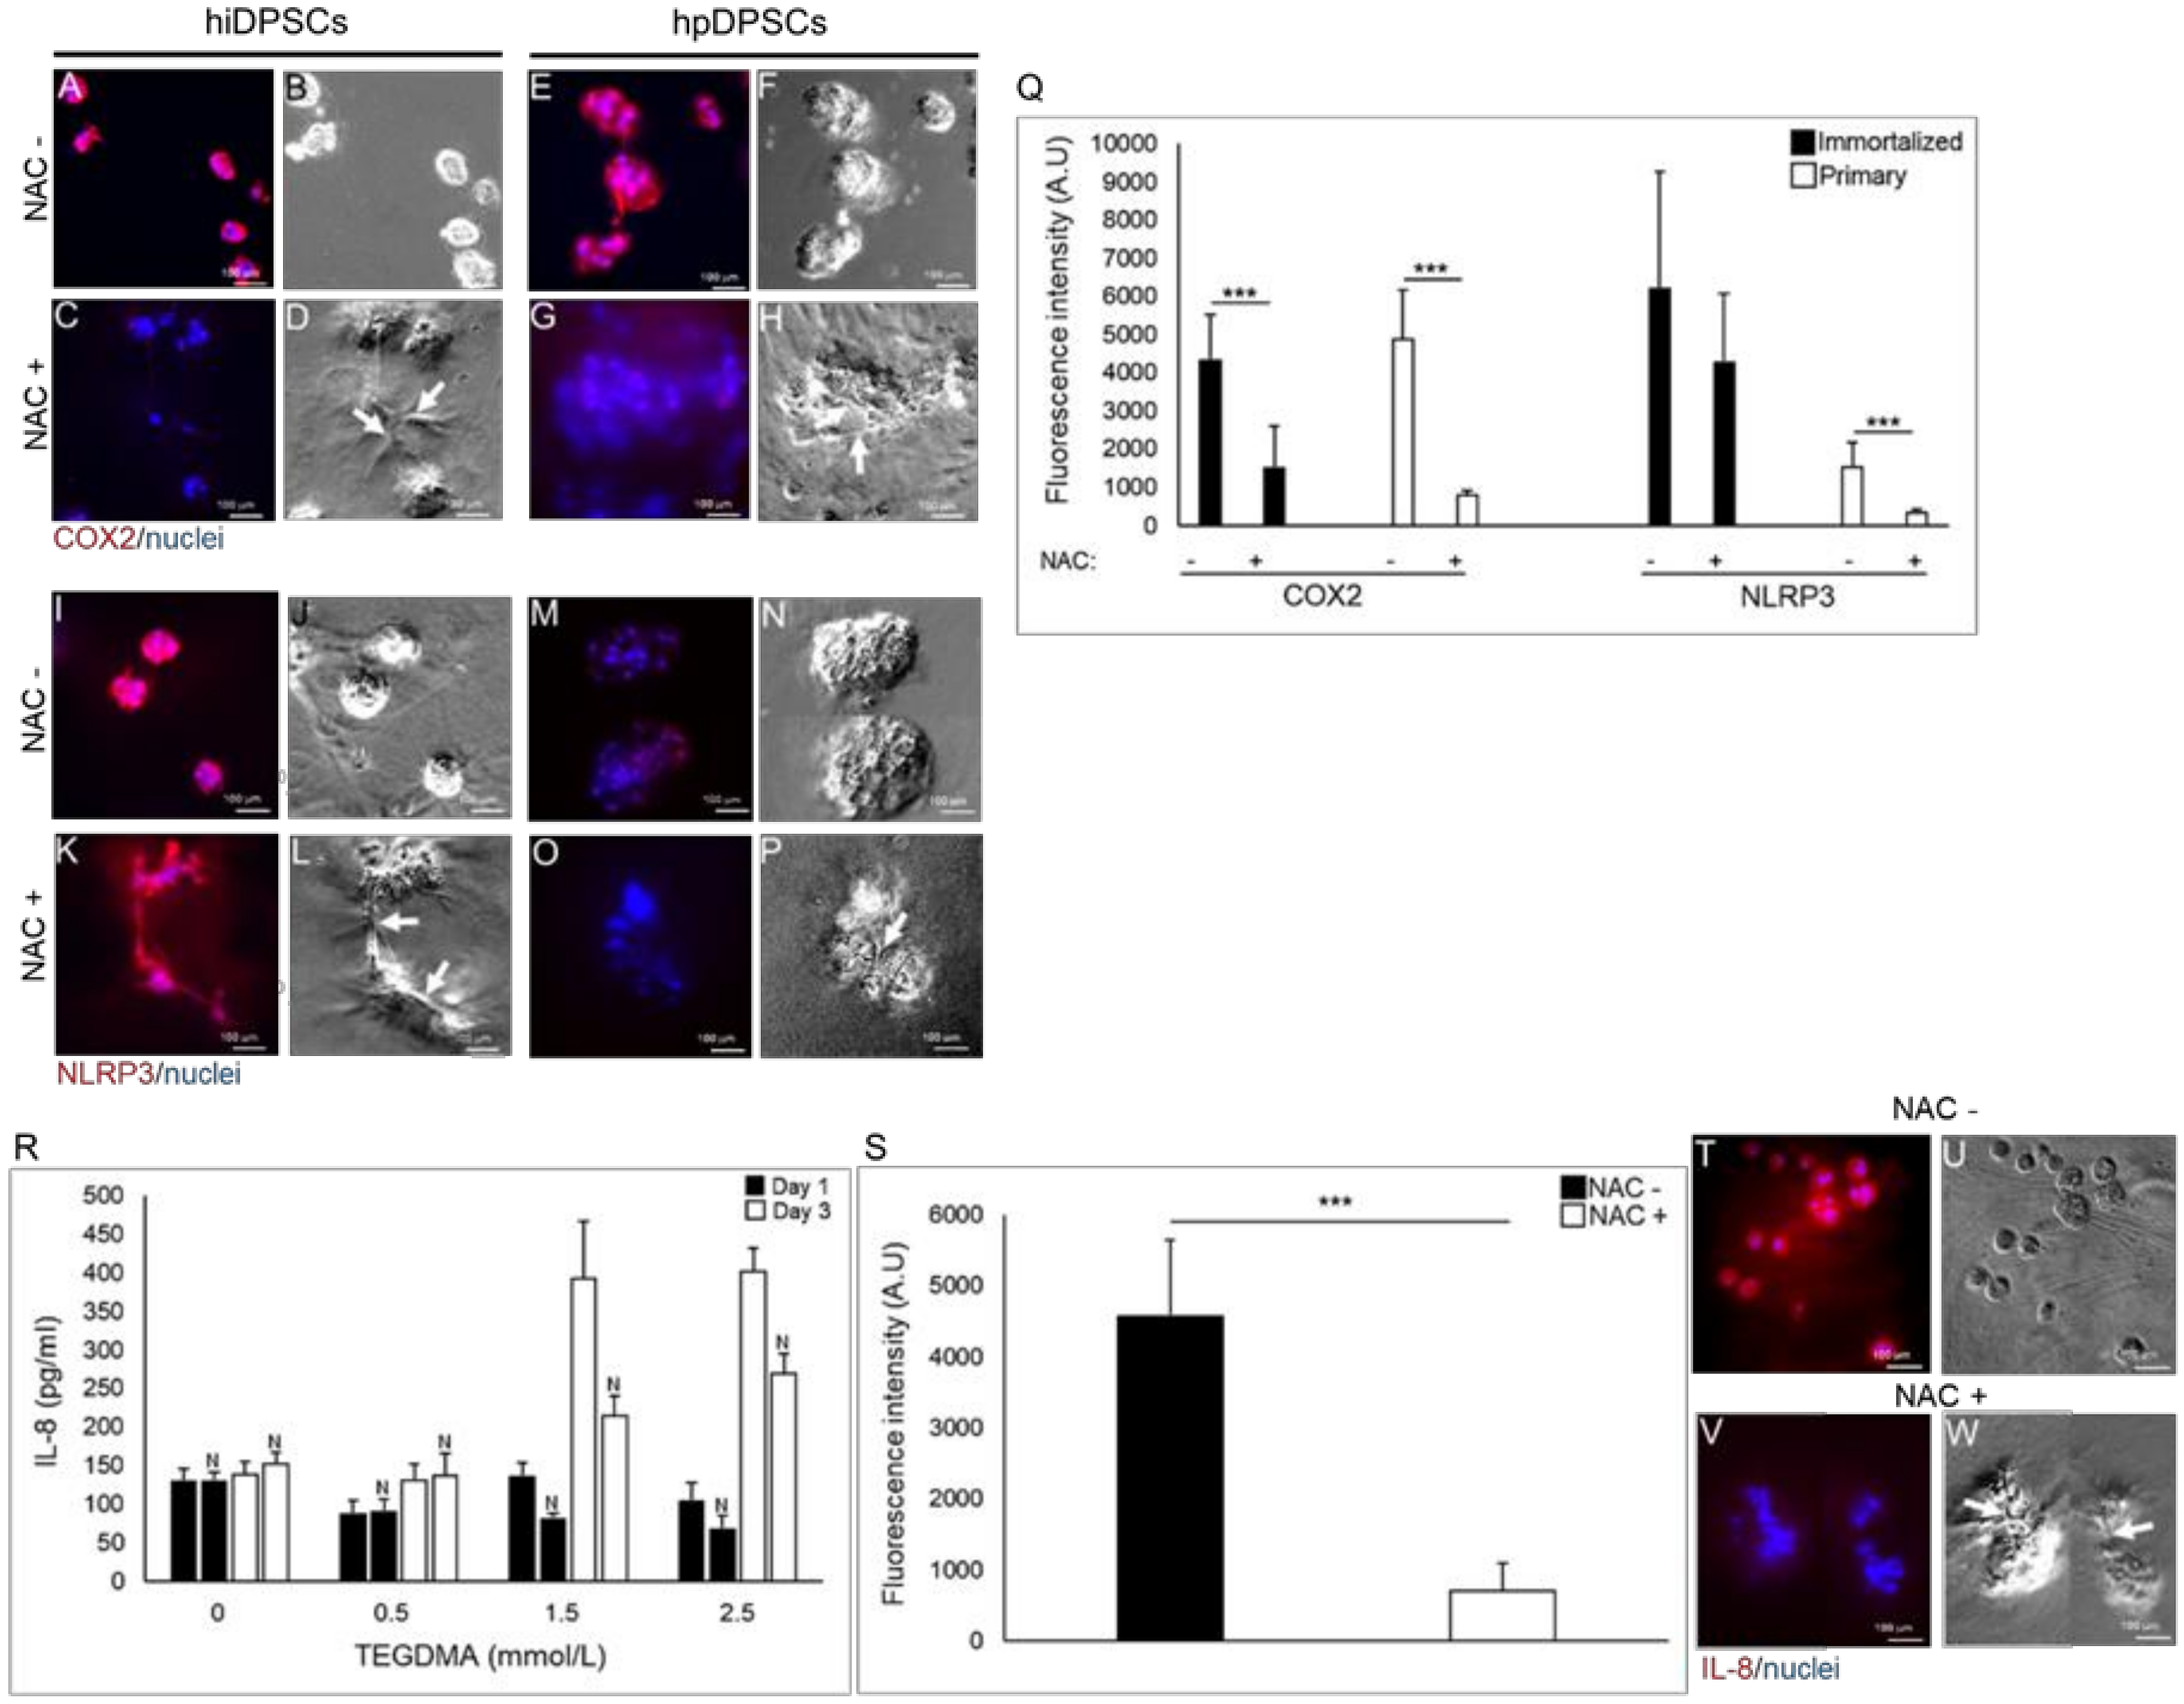 Ijms Free Full Text N Acetyl Cysteine Modulates The Inflammatory And Oxidative Stress Responses Of Rescued Growth Arrested Dental Pulp Microtissues Exposed To Tegdma In Ecm